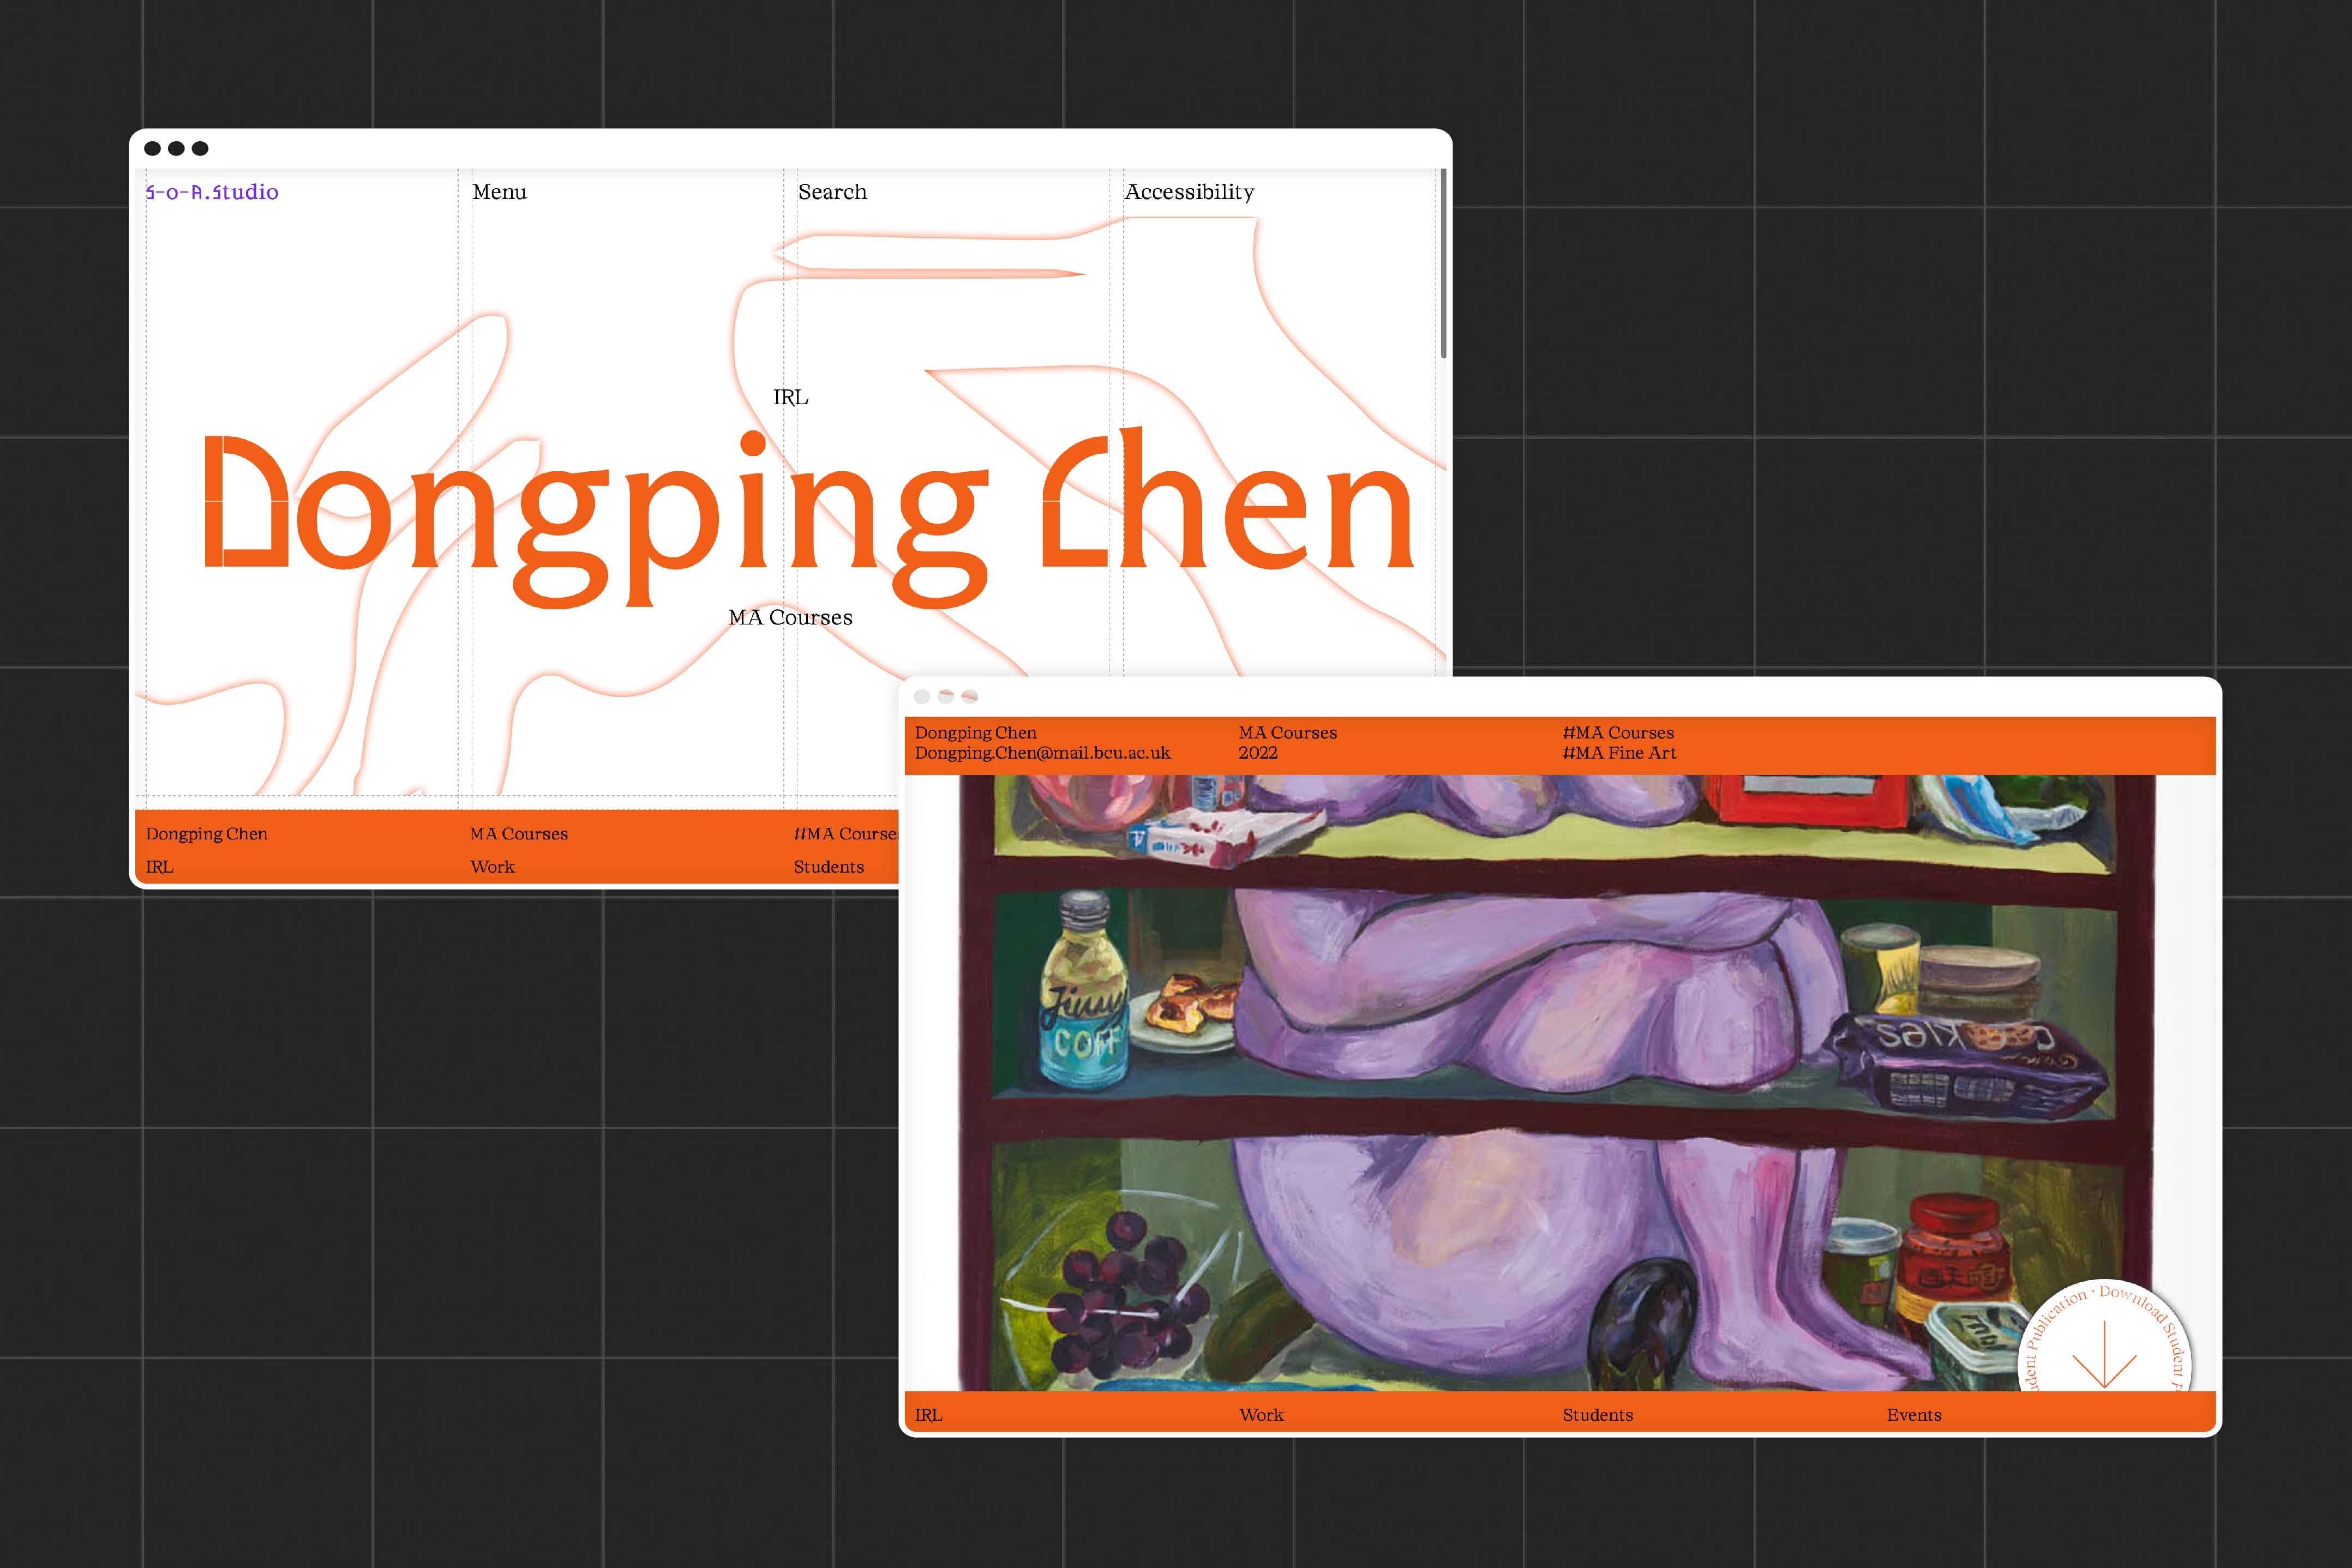 Website images showing Donping Chens's work, the first image shows the Donping Chens's name in the branding fonts. The second image shows an image of Donping Chens's work.